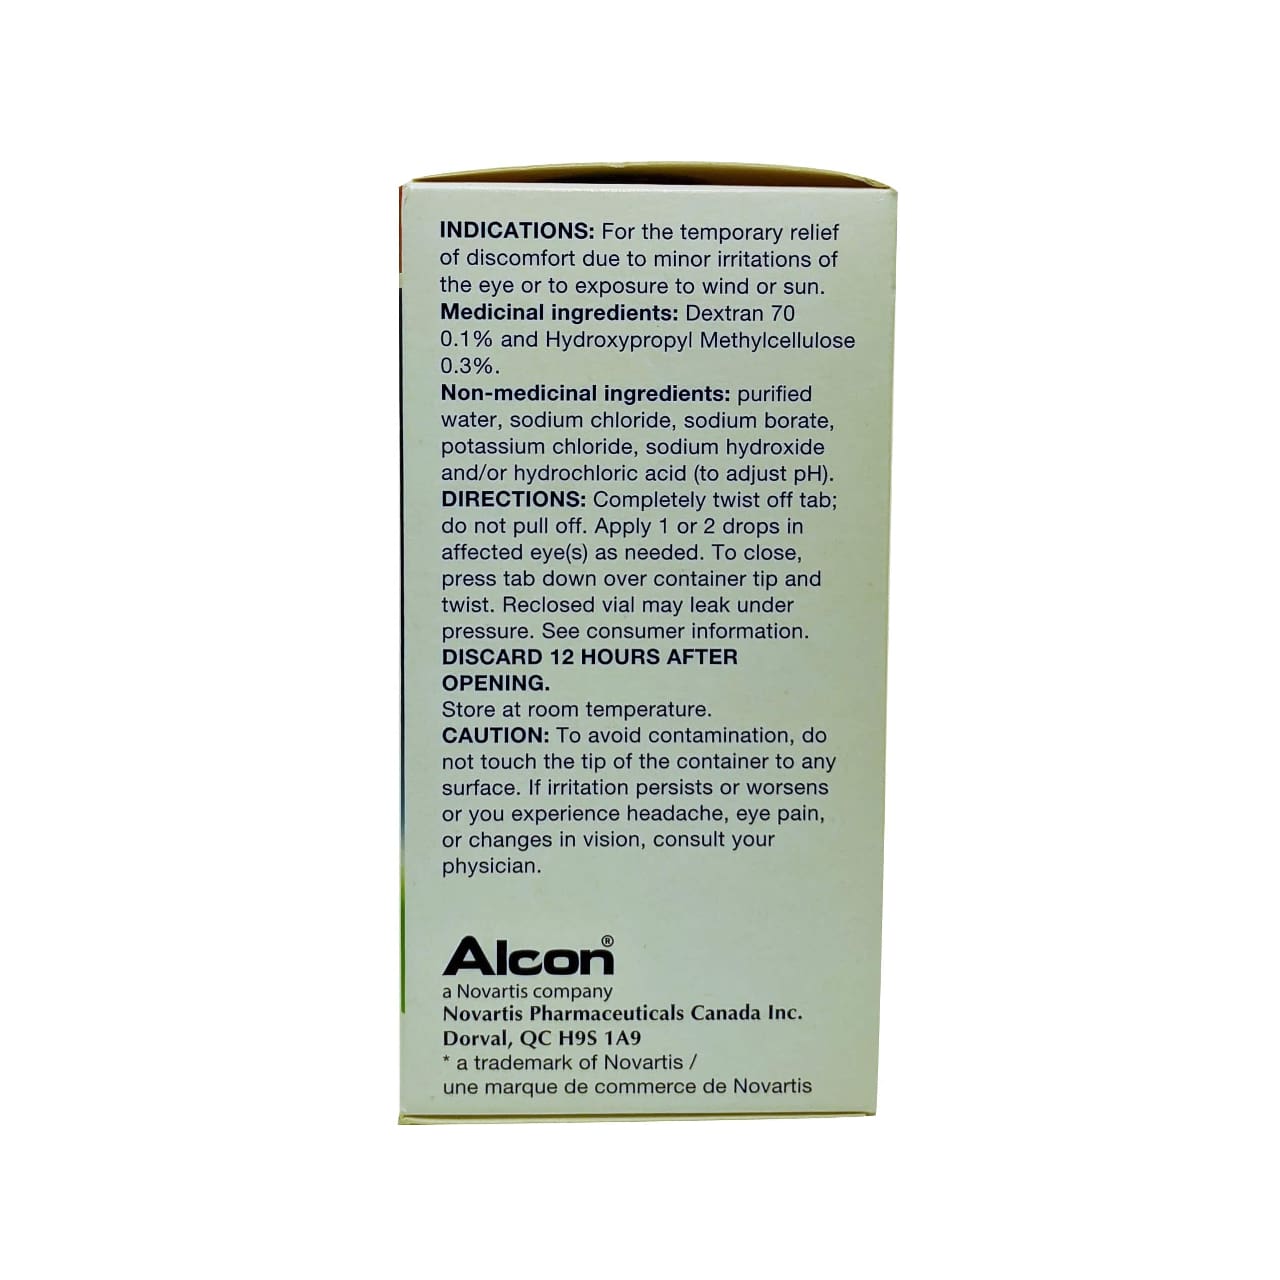 Indications, ingredients, directions, and warnings for Alcon Tears Naturale Free Lubricant Eye Drops in English